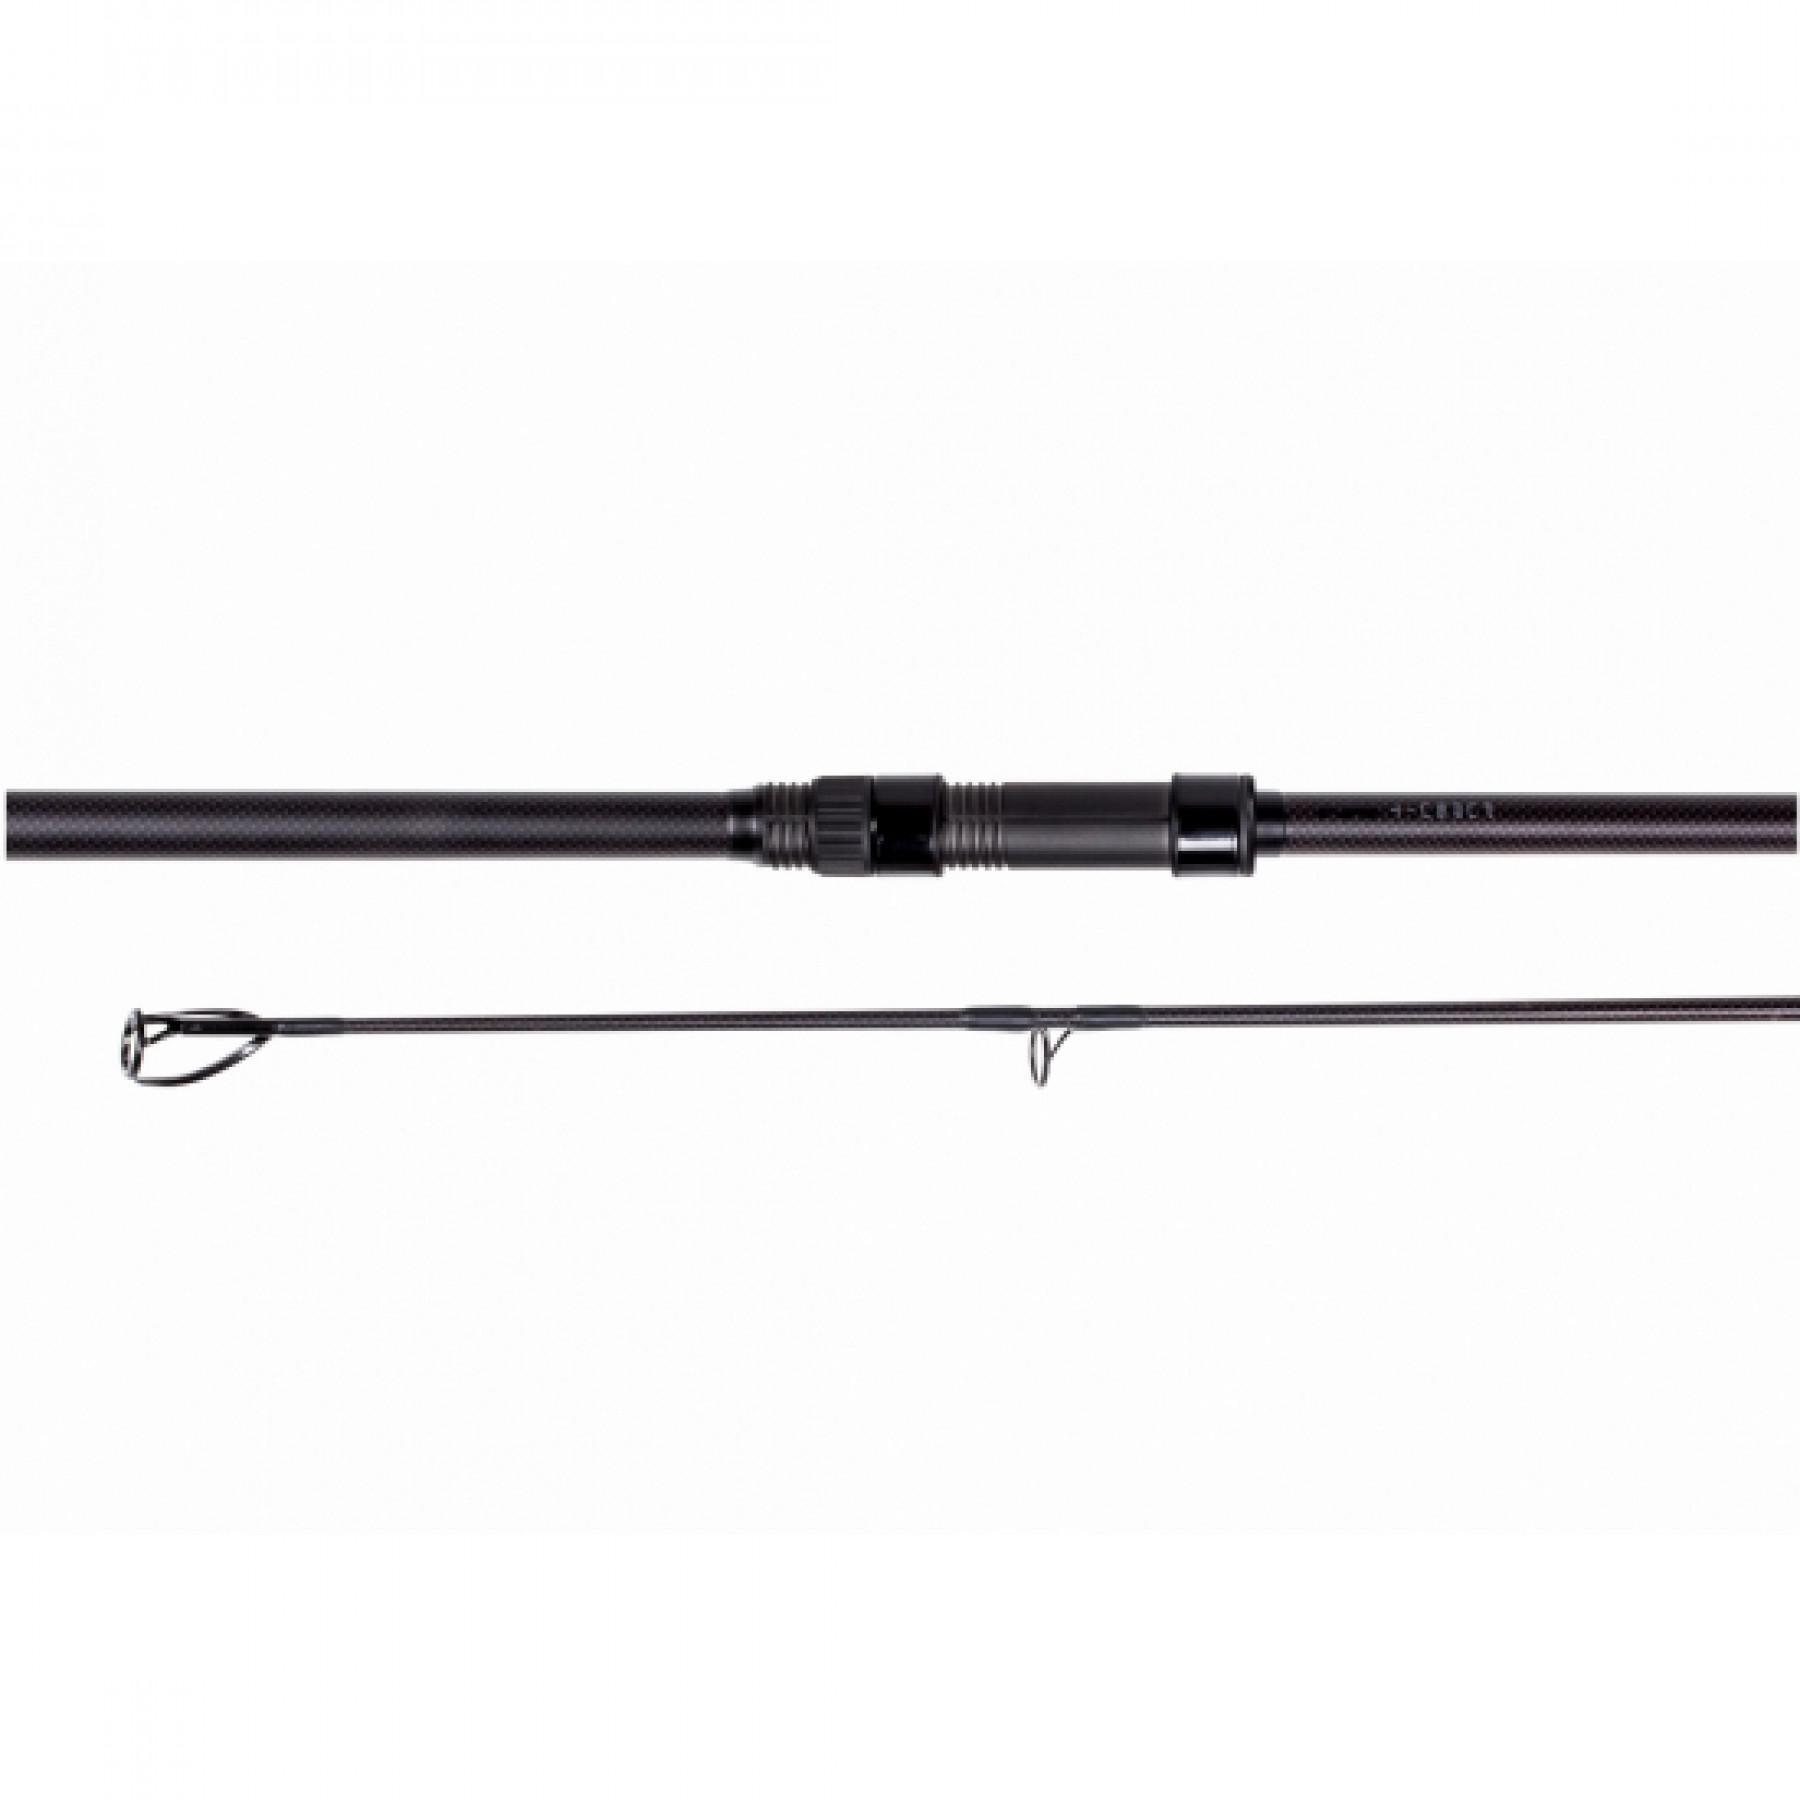 Fishing rod Nash Pursuit Pursuit 2 foot 3.5 lb S (Stepped Up) Abbreviated